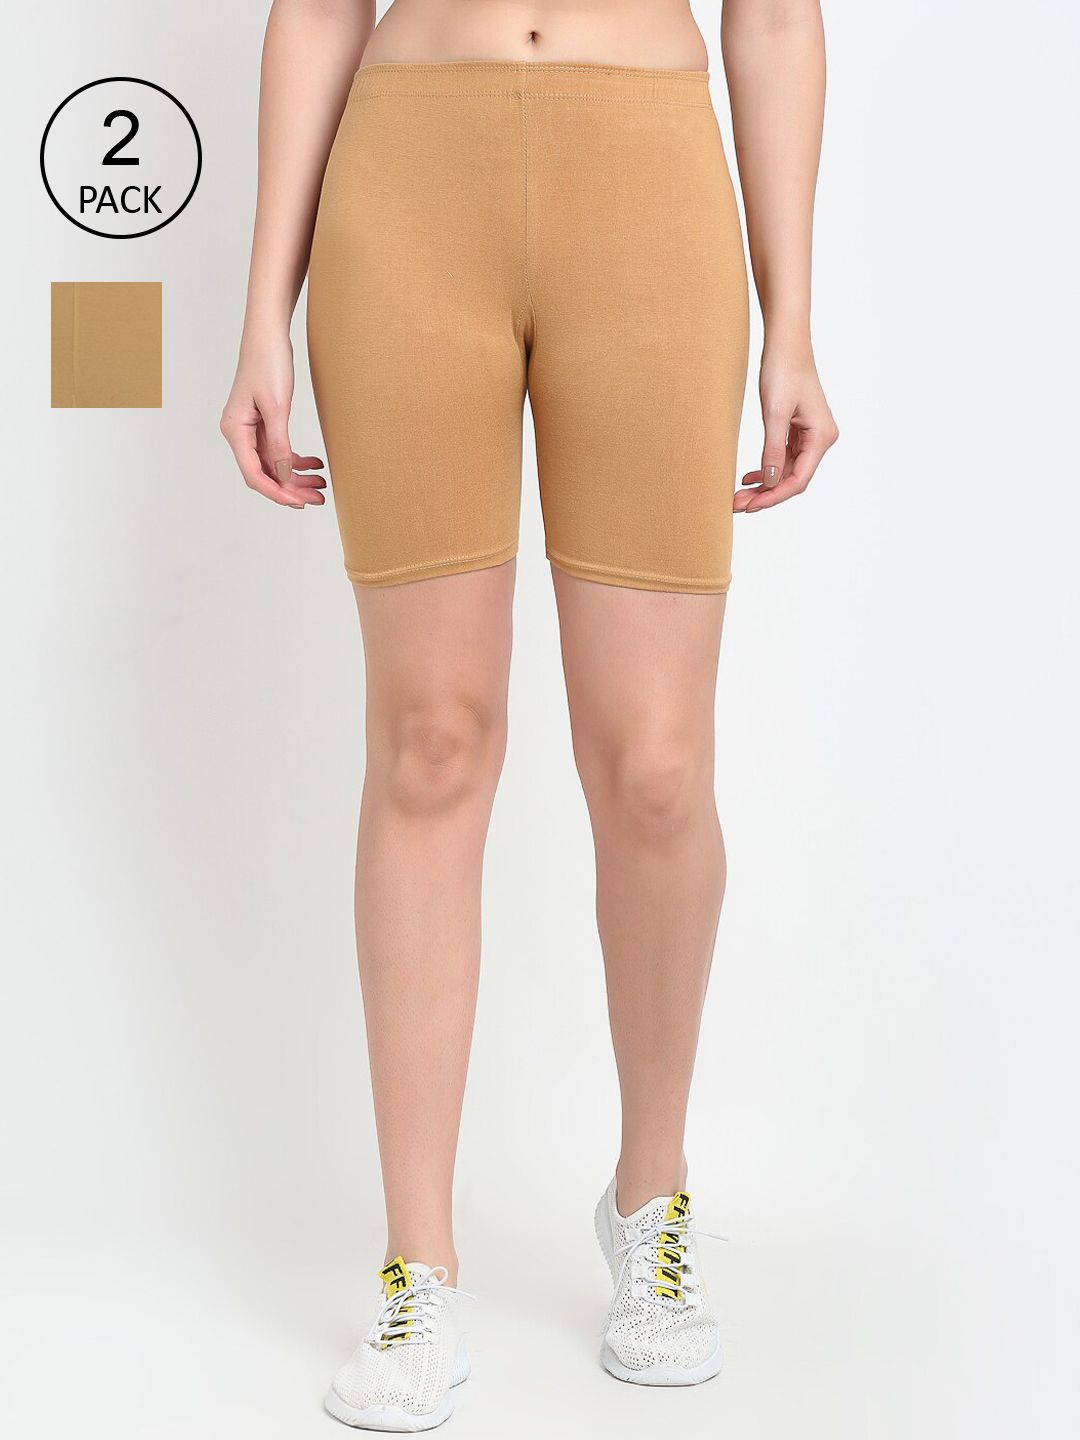 GRACIT Women Pack Of 2 Nude-Colored Cycling Sports Shorts Price in India